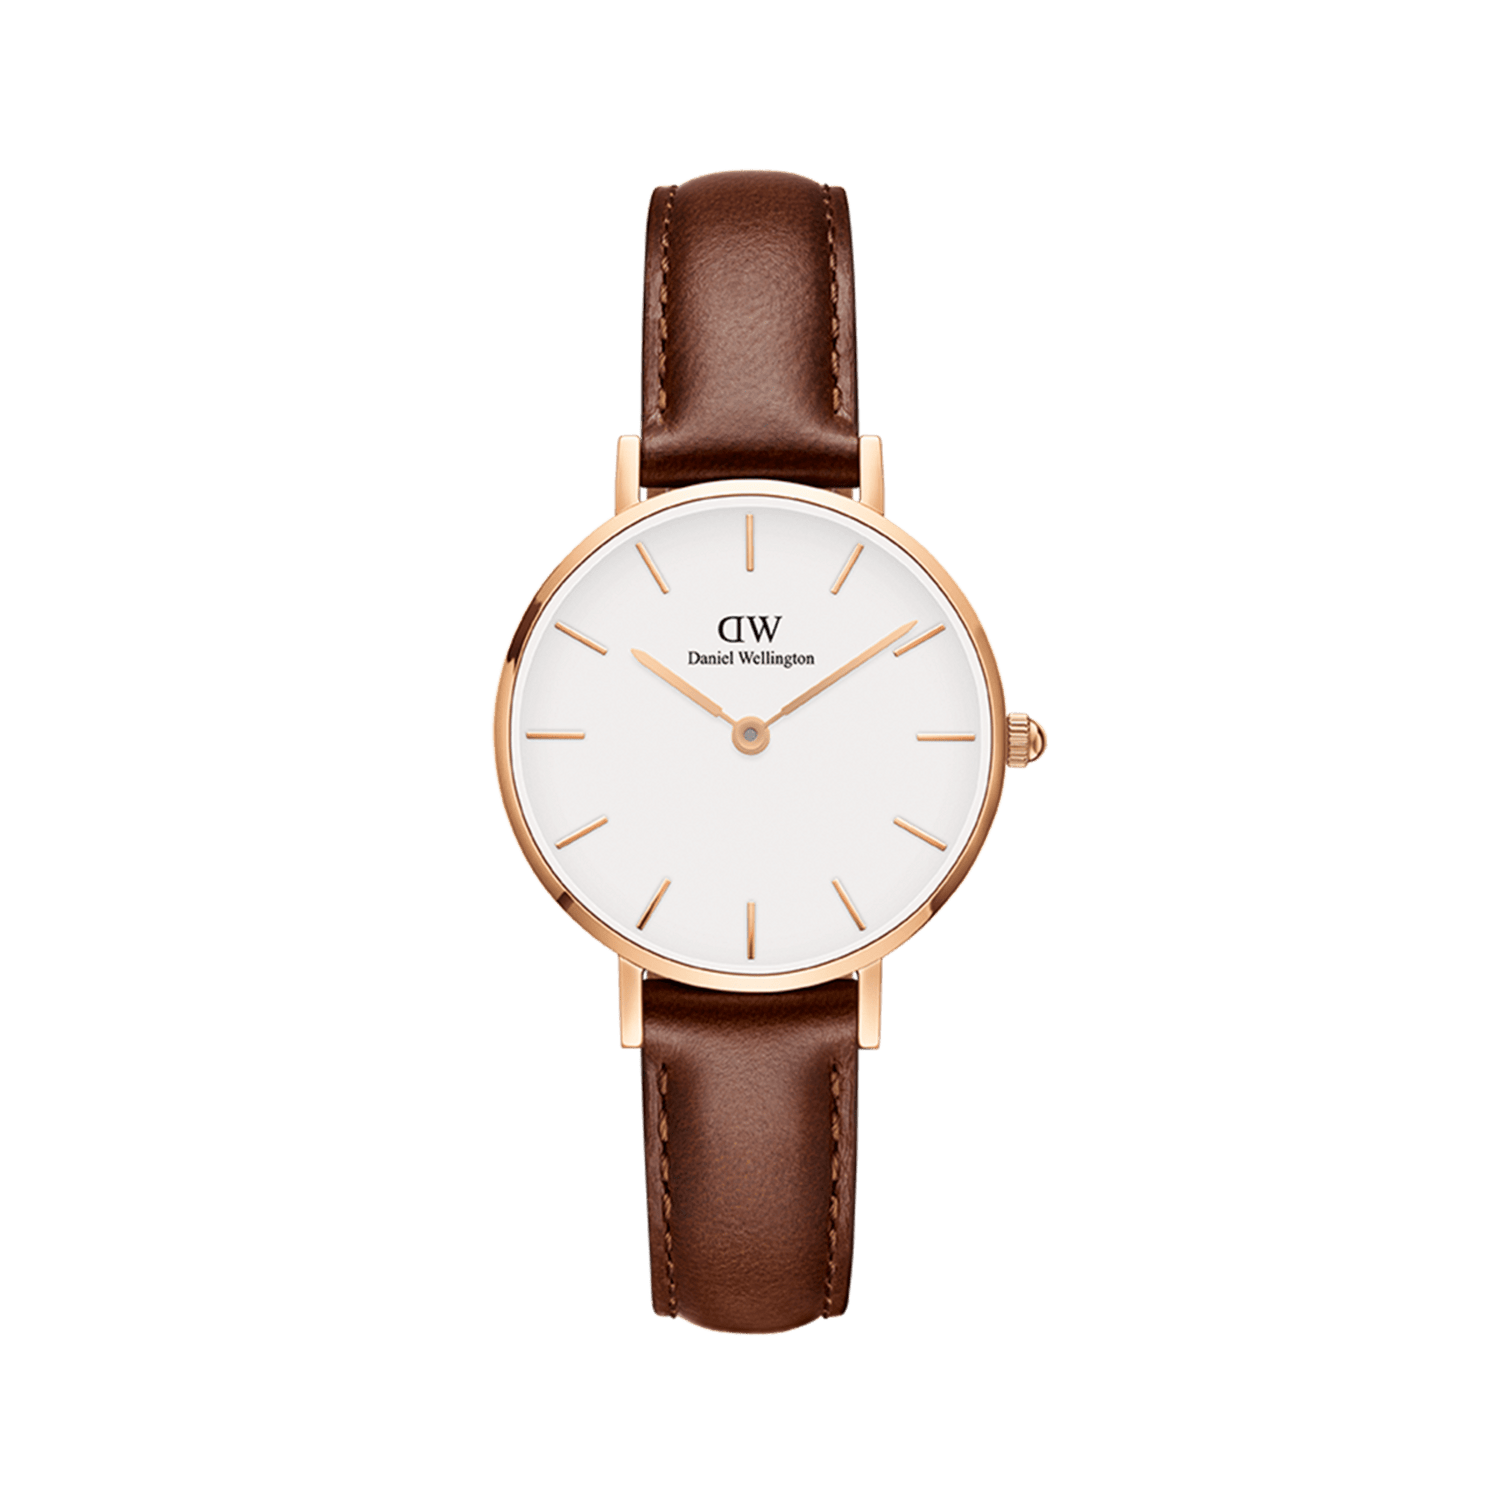 Petite Collection - Small watches in gold and silver | DW